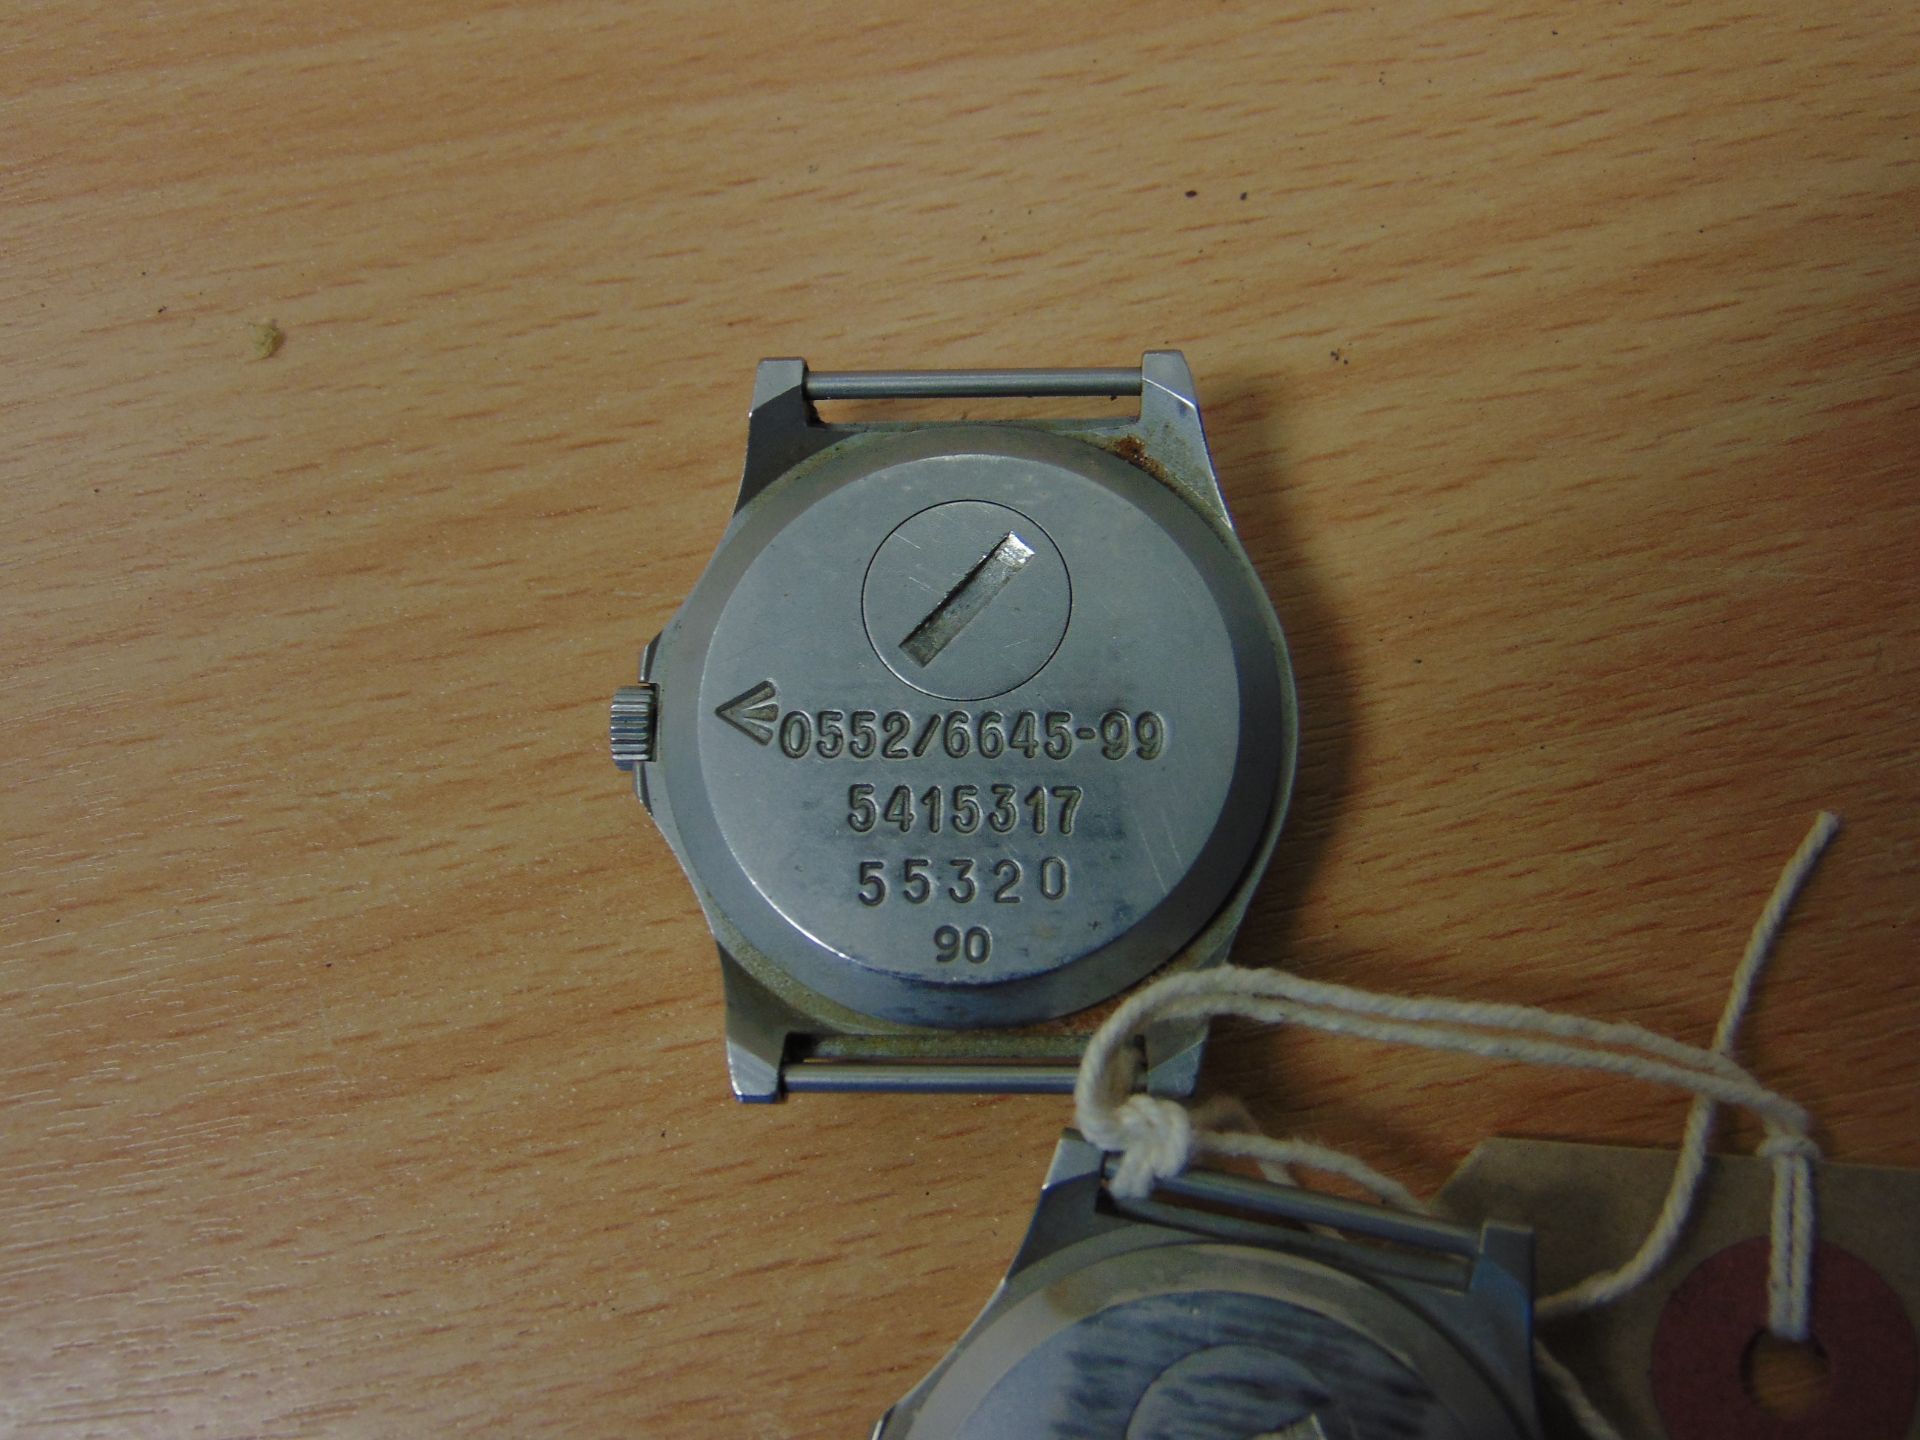 2 X CWC SERVICE WATCHES W10/0552 DATED 1990/1998 NATO MARKED - Image 6 of 6